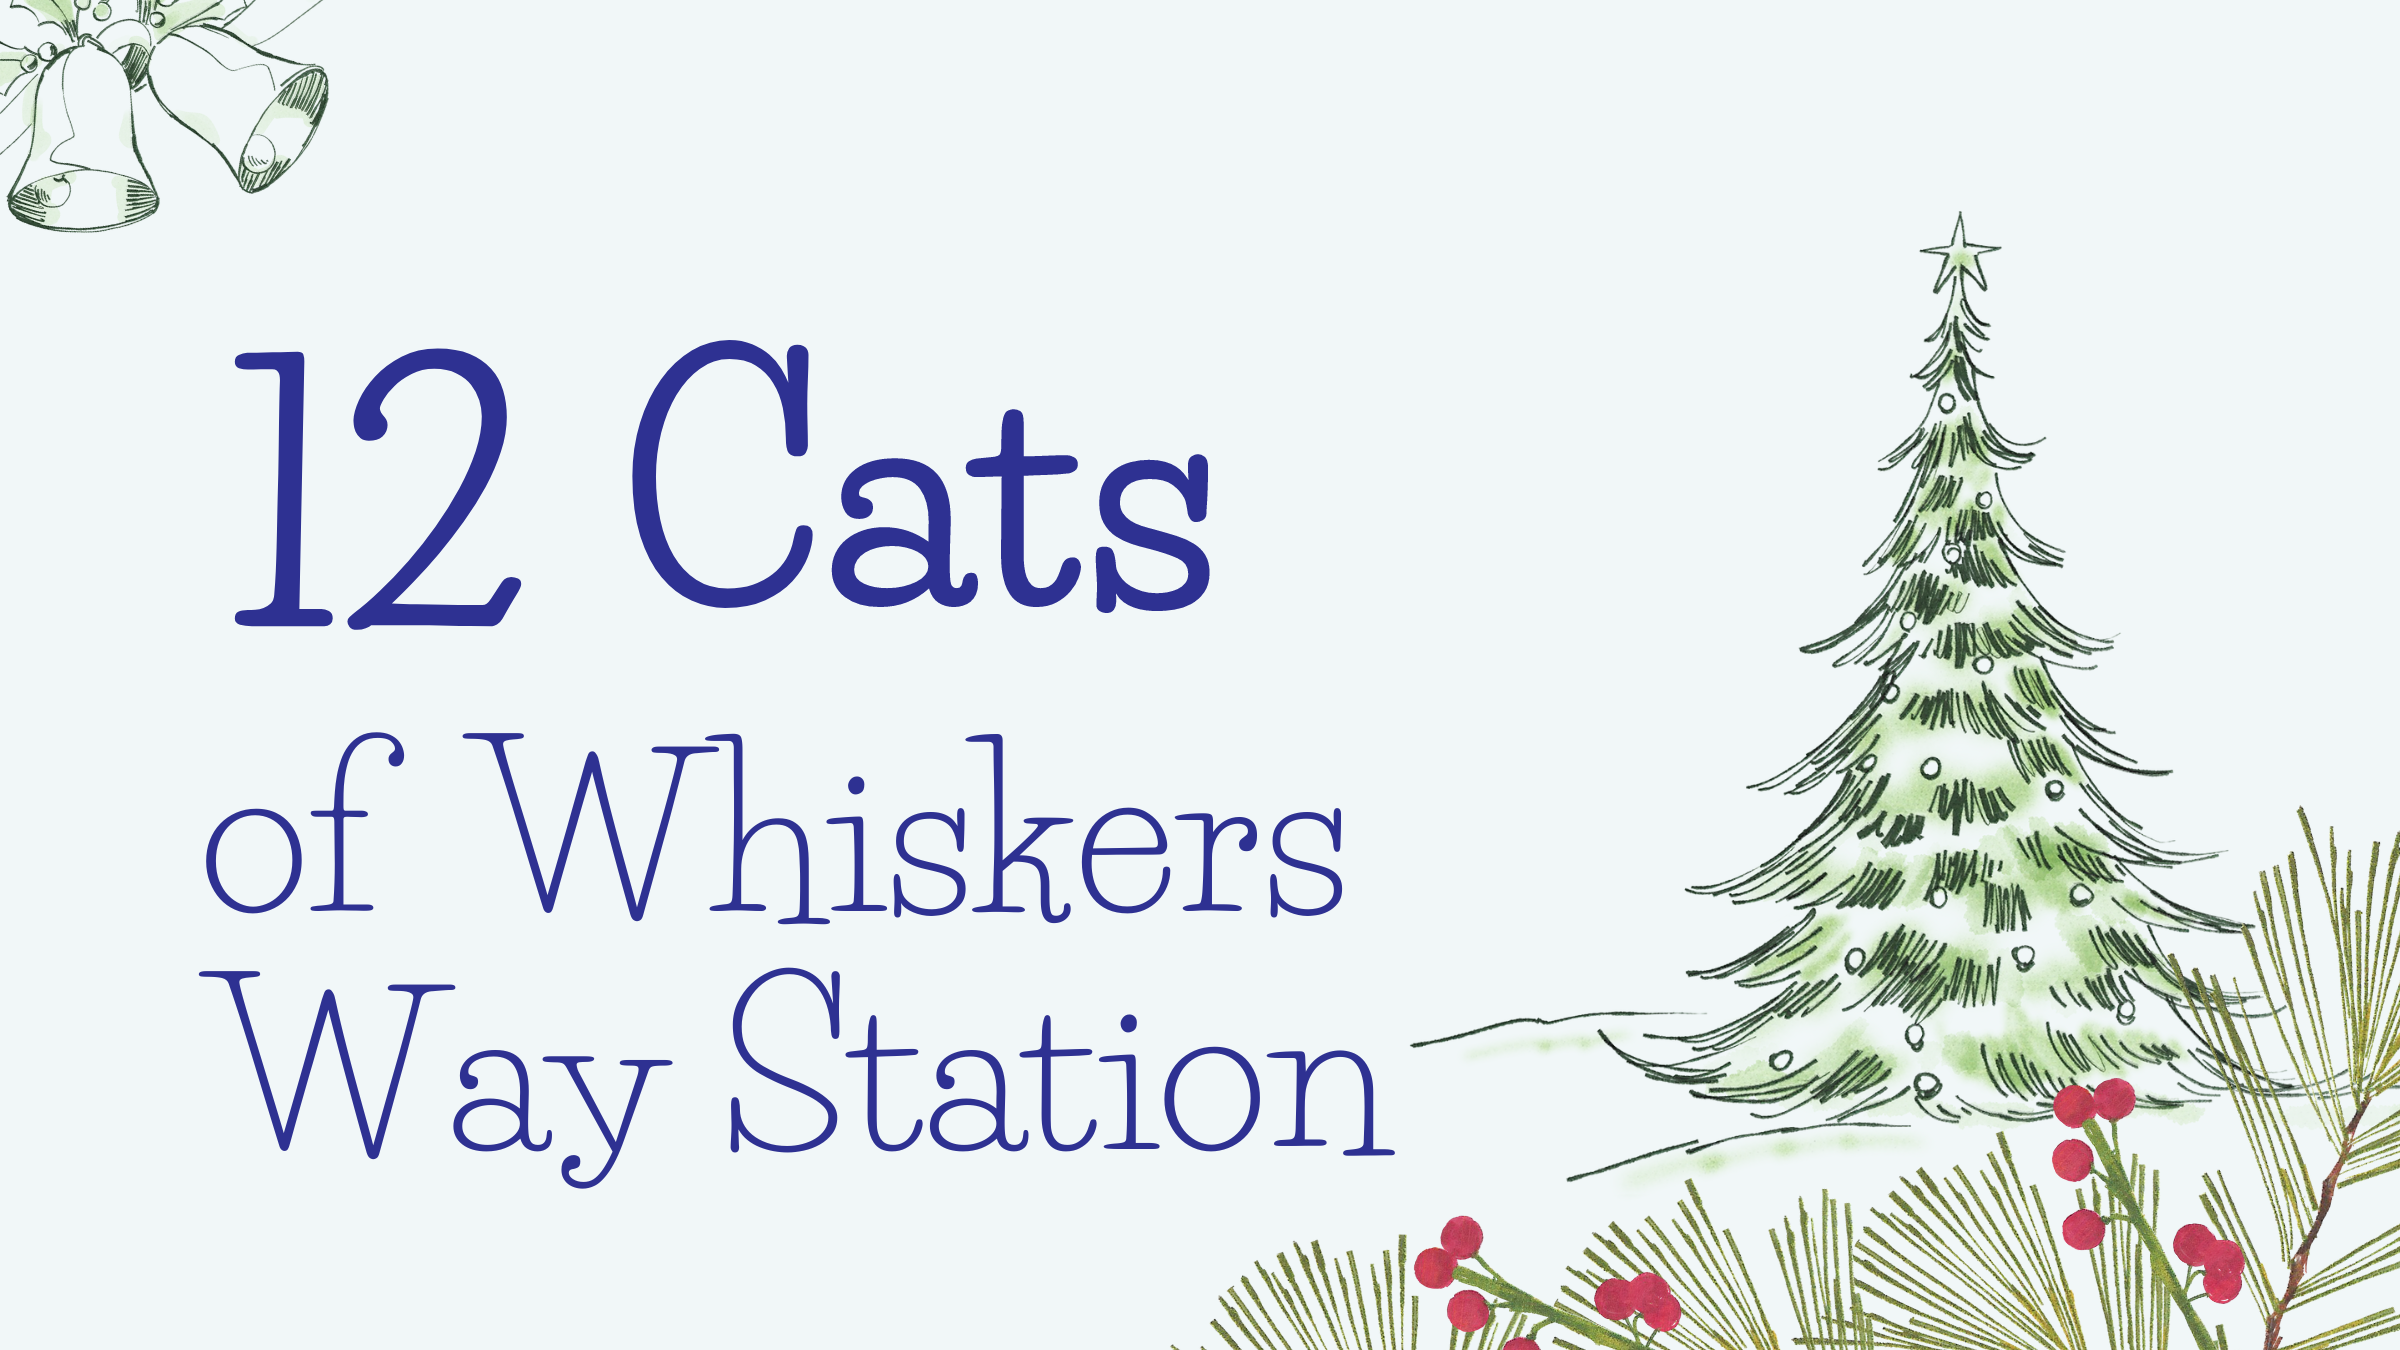 12 Cats of Whiskers Way Station